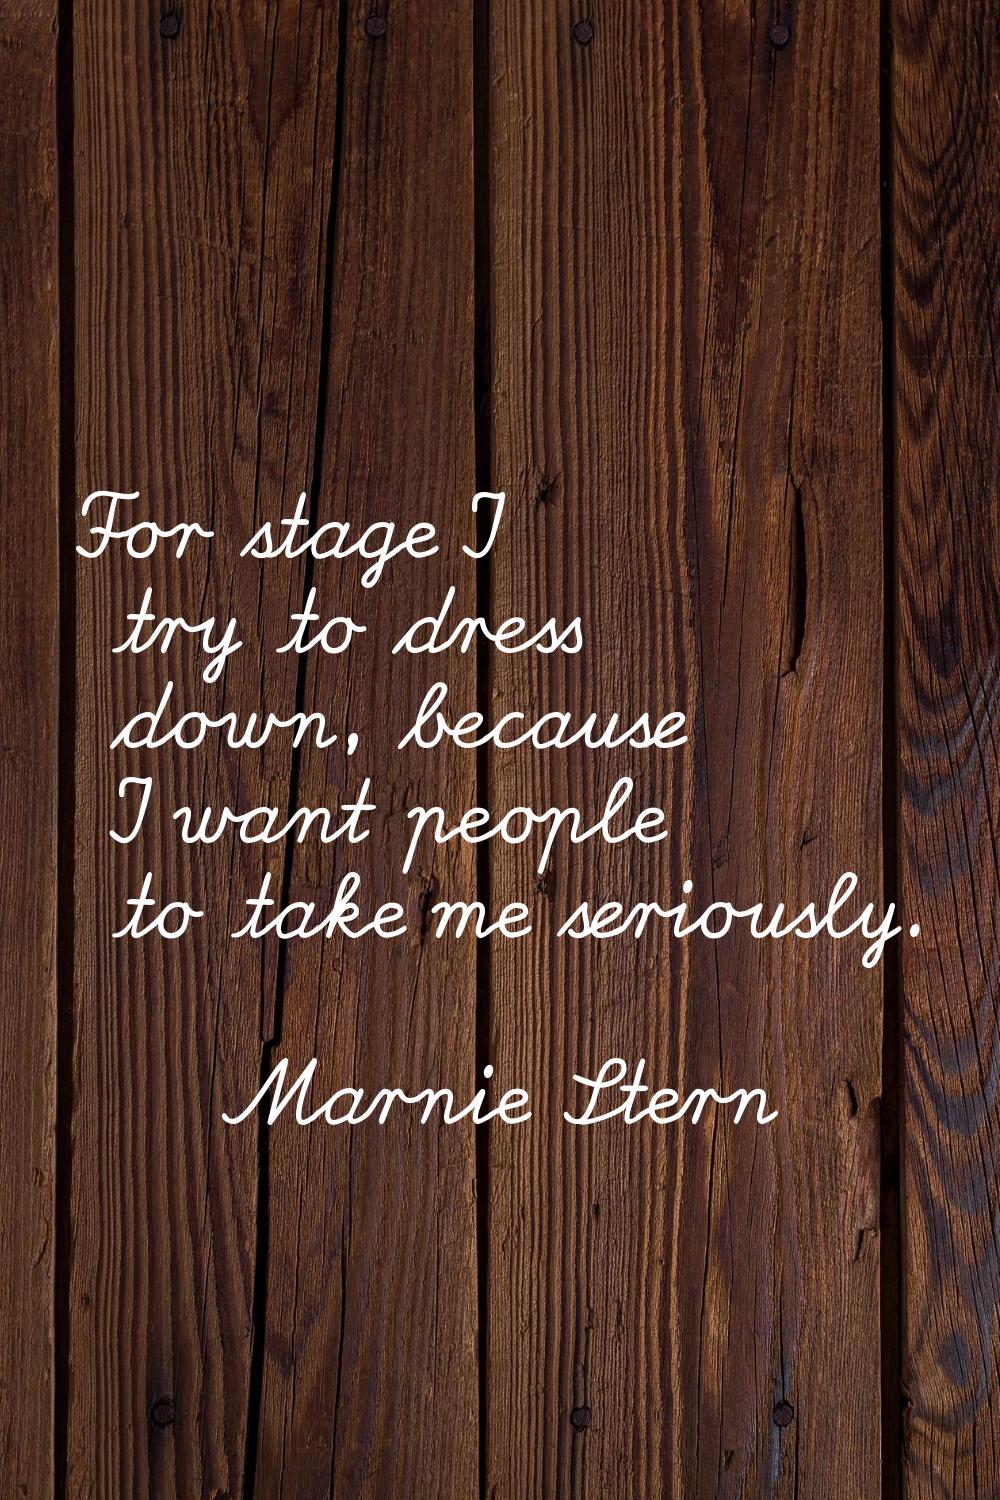 For stage I try to dress down, because I want people to take me seriously.